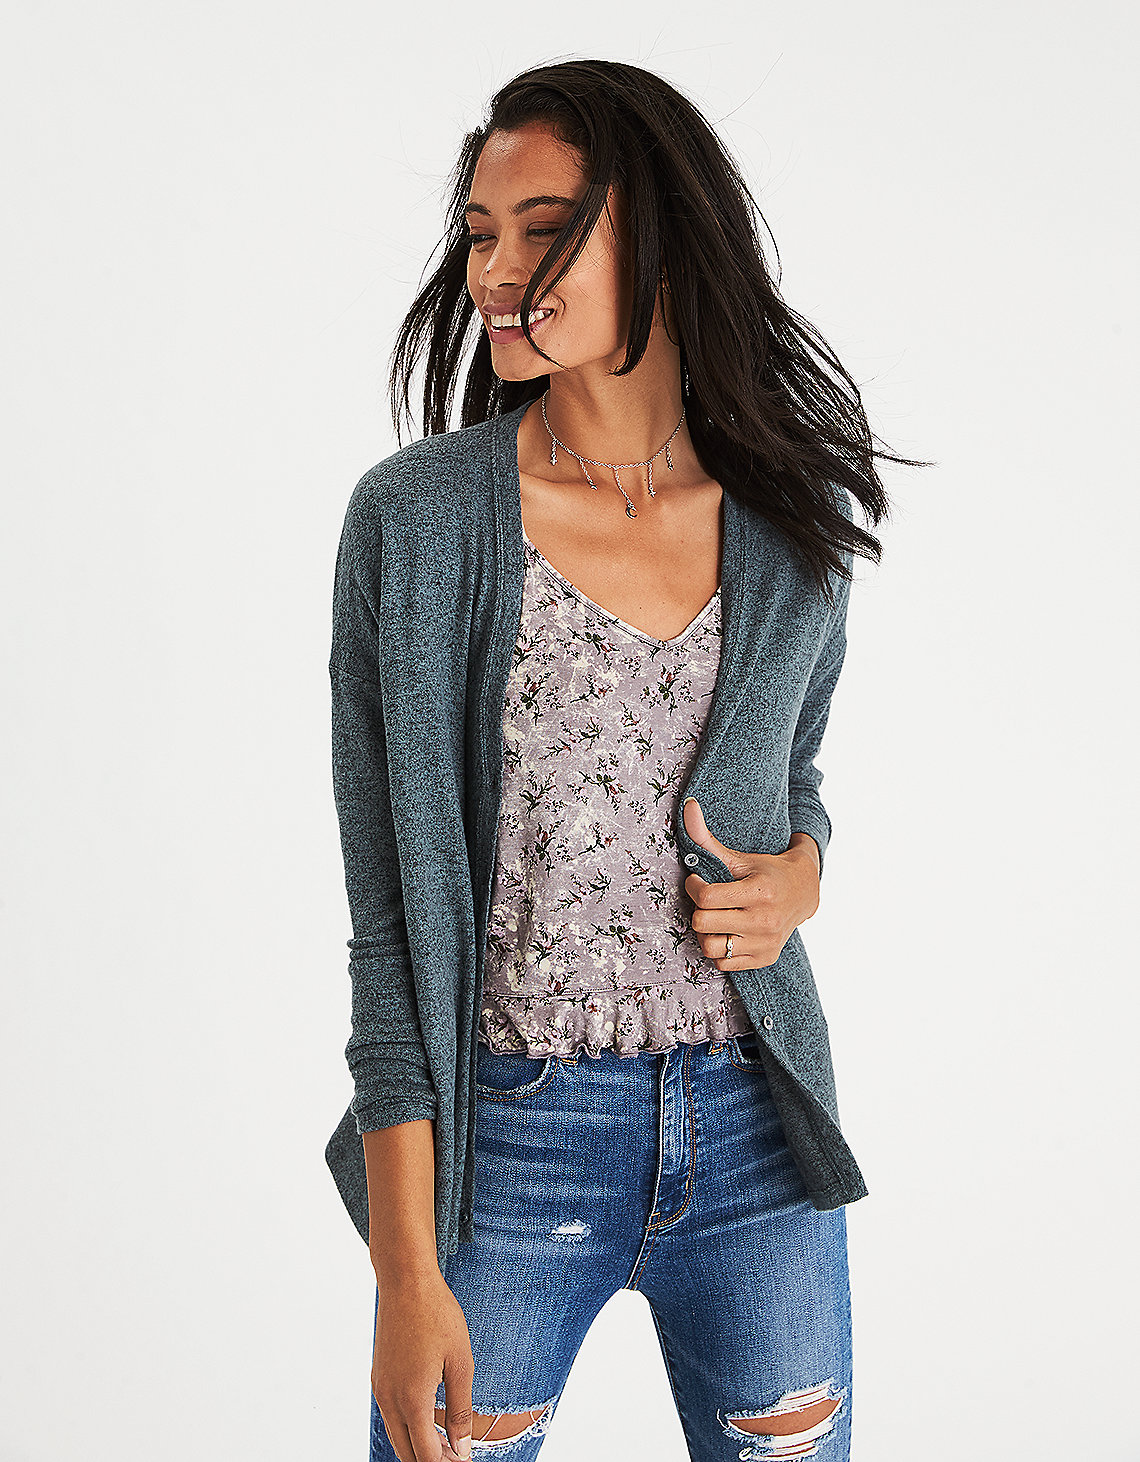 Let yourself be surprised by all the preppy chic goodness at AEO ...